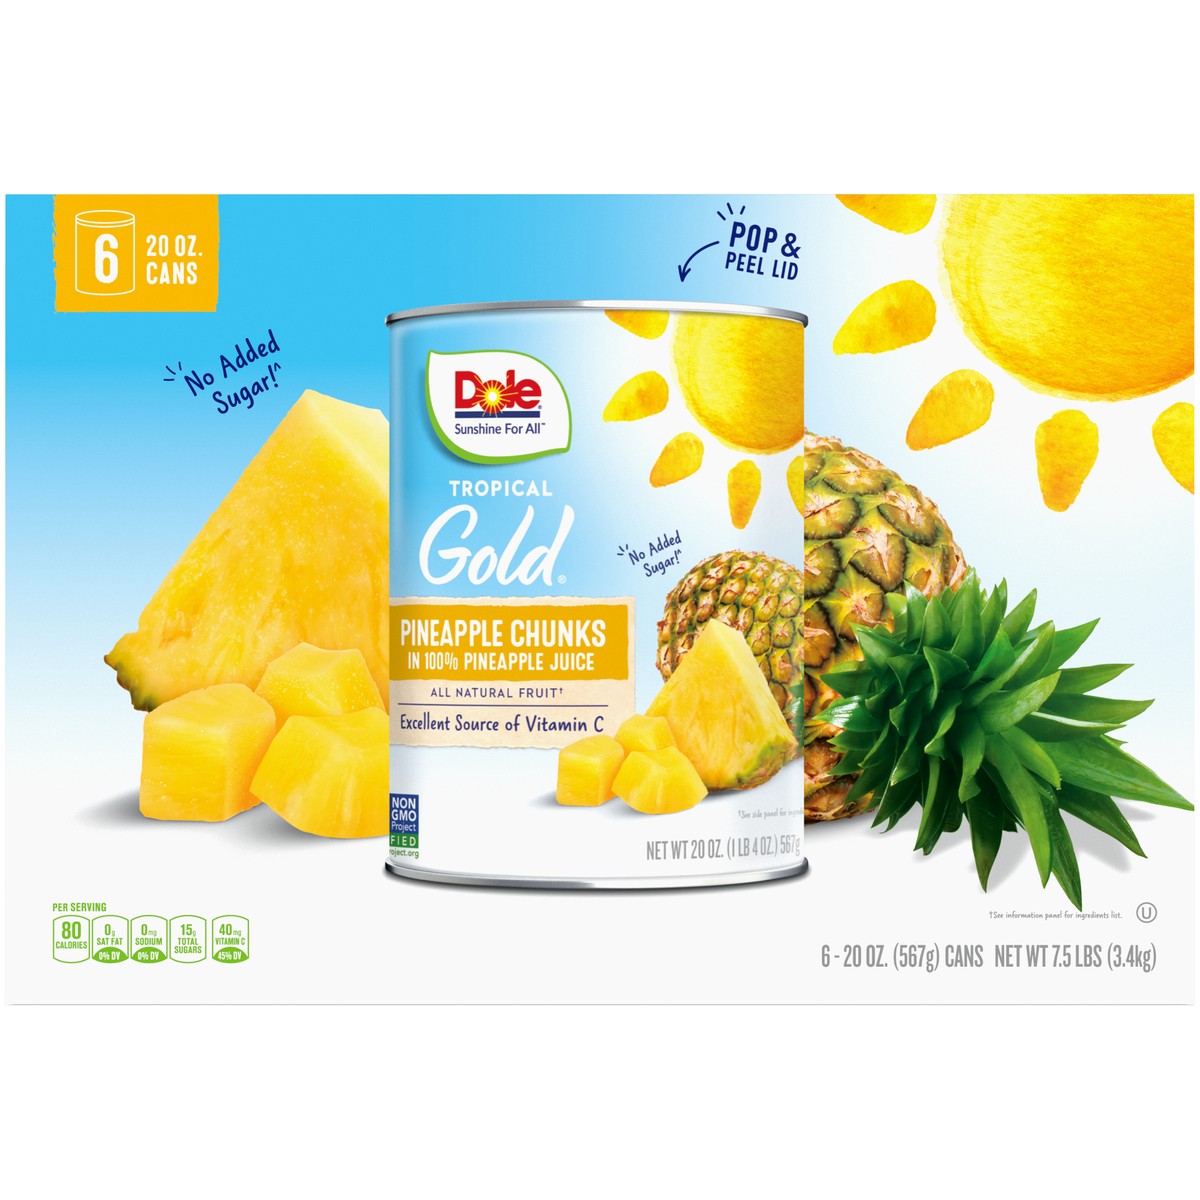 slide 9 of 9, Dole Tropical Gold Pineapple Chunks in 100% Pineapple Juice 6-20 oz. Cans, 7.5 lb